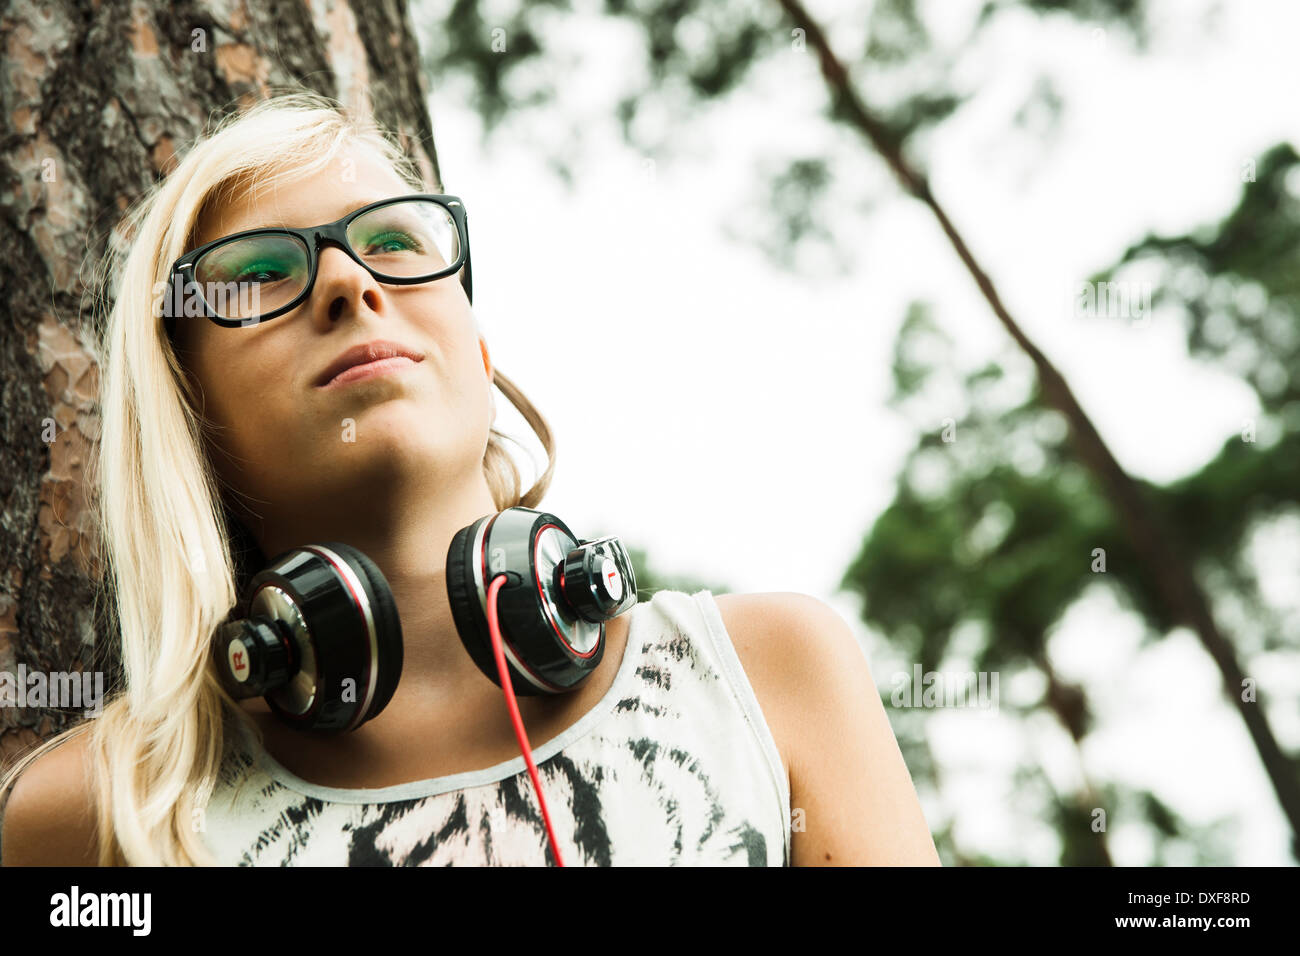 Portrait of girl wearing eyeglasses, standing next to tree in park, with headphones around neck, looking upward, Germany Stock Photo